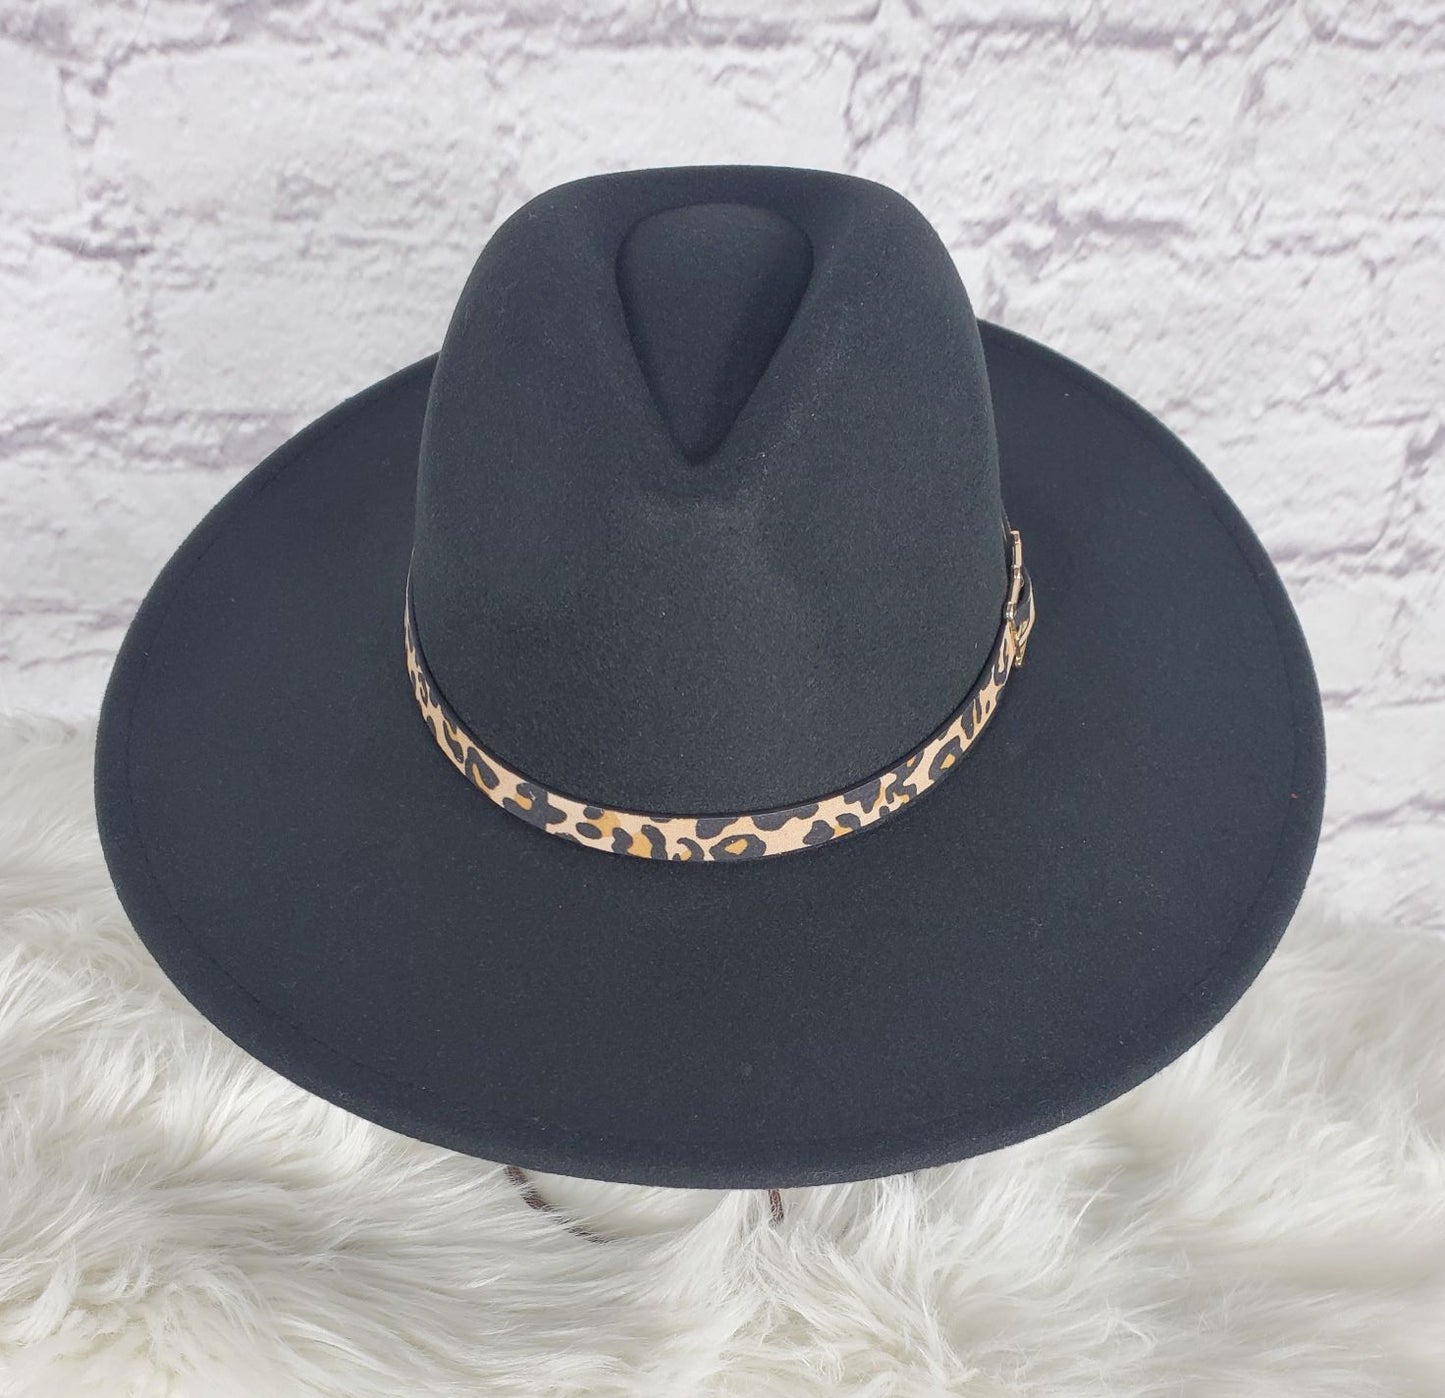 Panama with leopard band hat  Ivy and Pearl Boutique   